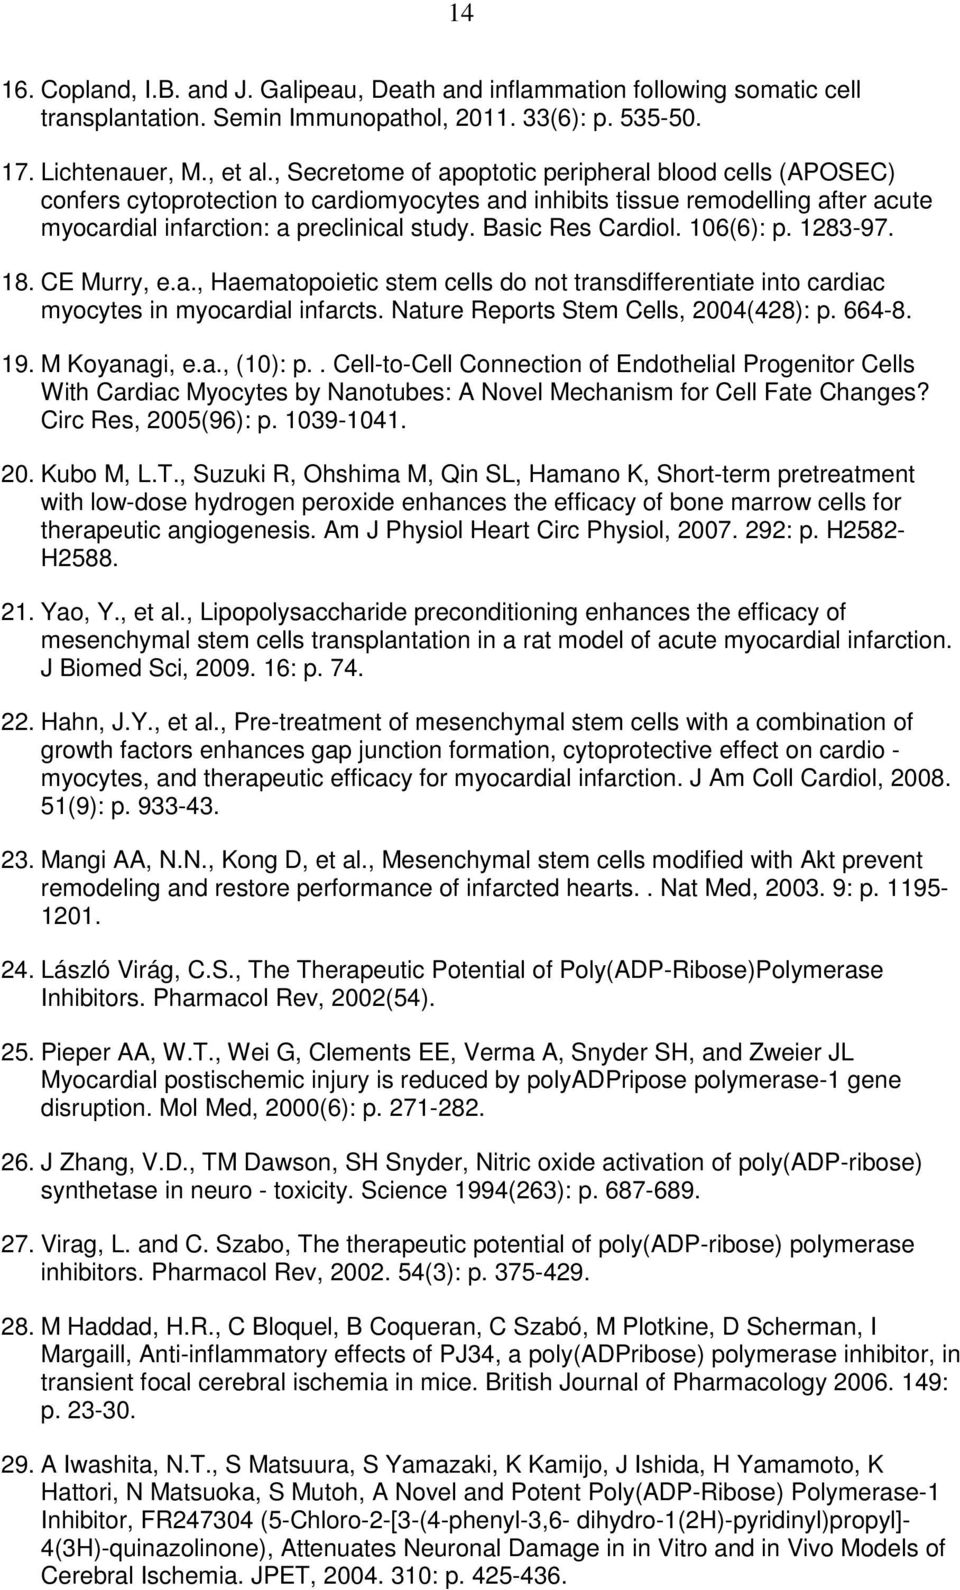 Basic Res Cardiol. 106(6): p. 1283-97. 18. CE Murry, e.a., Haematopoietic stem cells do not transdifferentiate into cardiac myocytes in myocardial infarcts. Nature Reports Stem Cells, 2004(428): p.